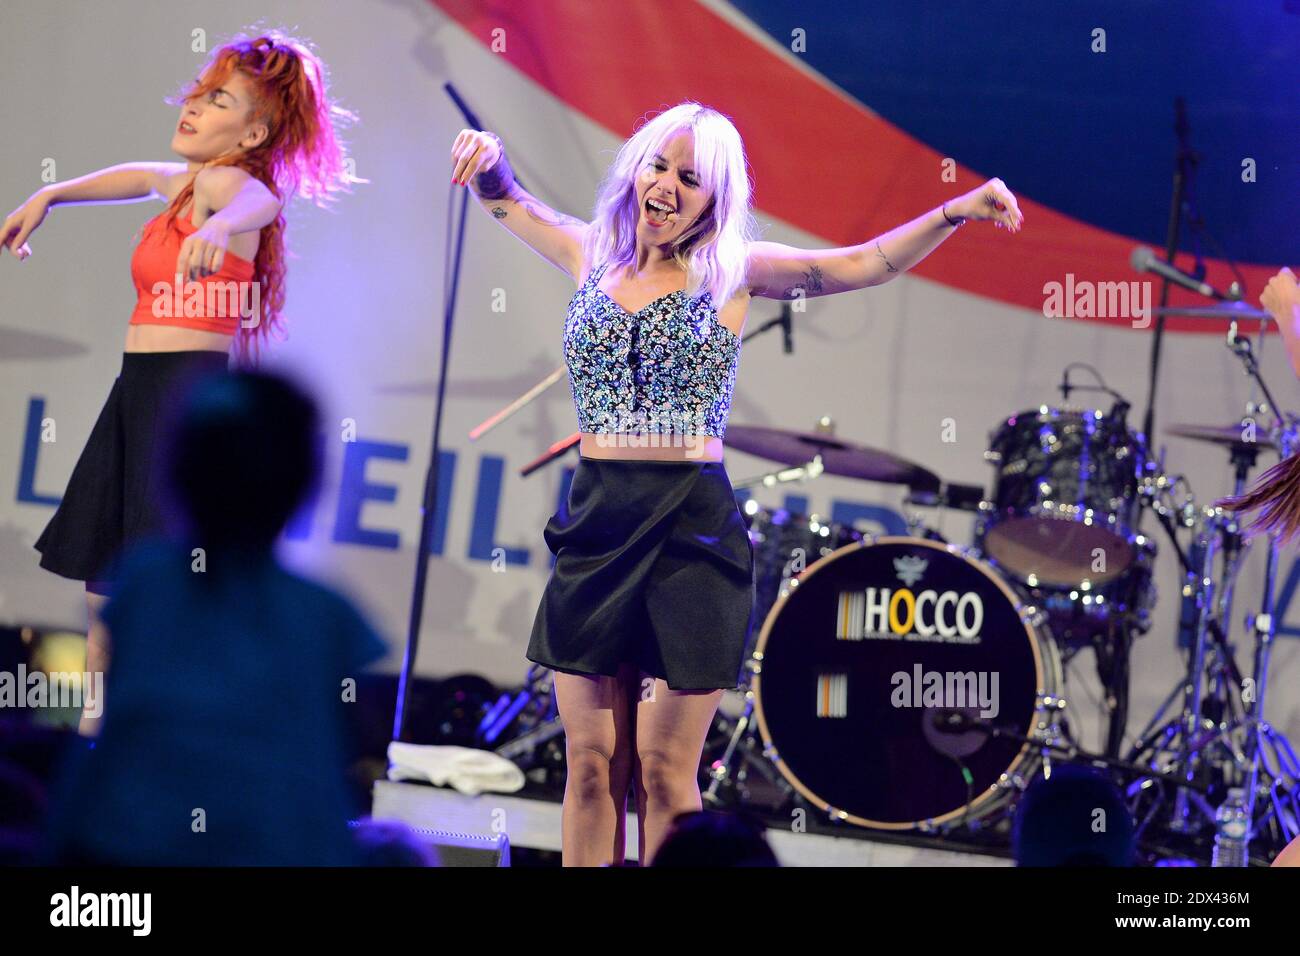 Alizee performs live on stage during 'RFM Summer Live 2014' in Levallois-Perret, France on July 4, 2014. Photo by Nicolas Briquet/ABACAPRESS.COM Stock Photo